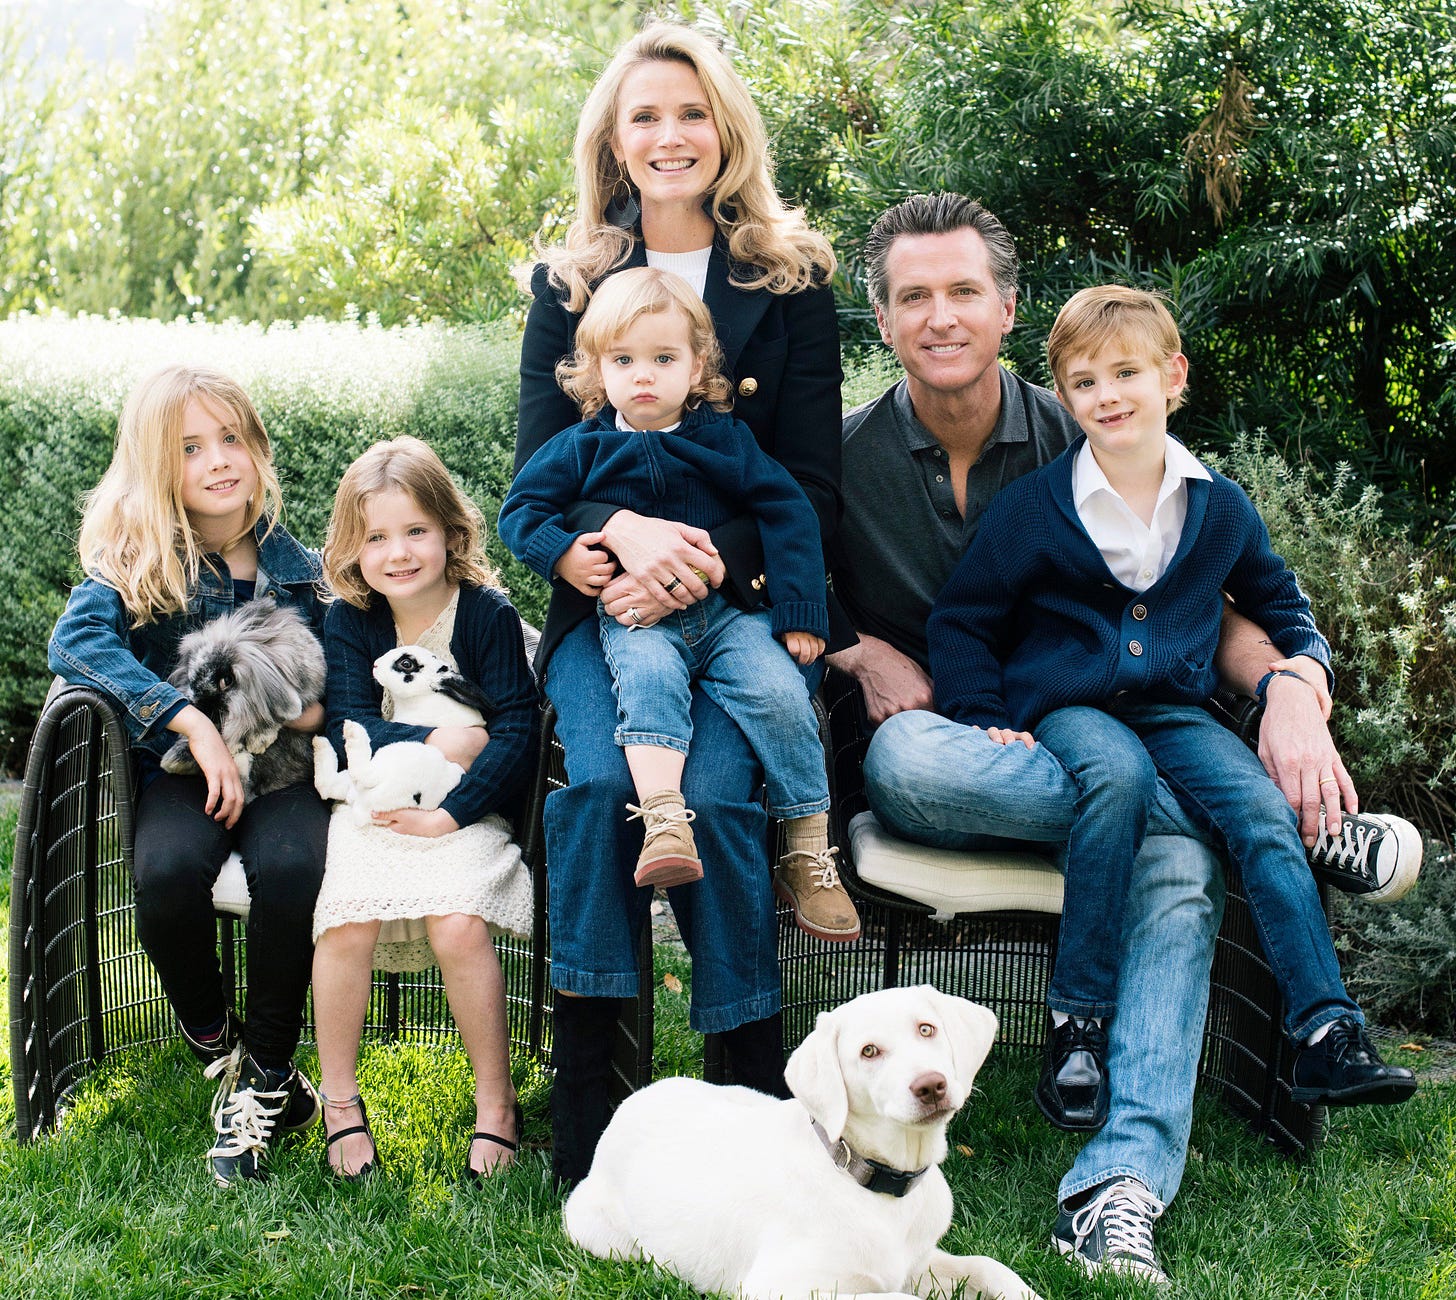 Gavin Newsom on X: "Wishing you and your loved ones peace, joy, and most of  all hope this holiday season! Merry Christmas from our family to yours!  P.S. - Can you tell